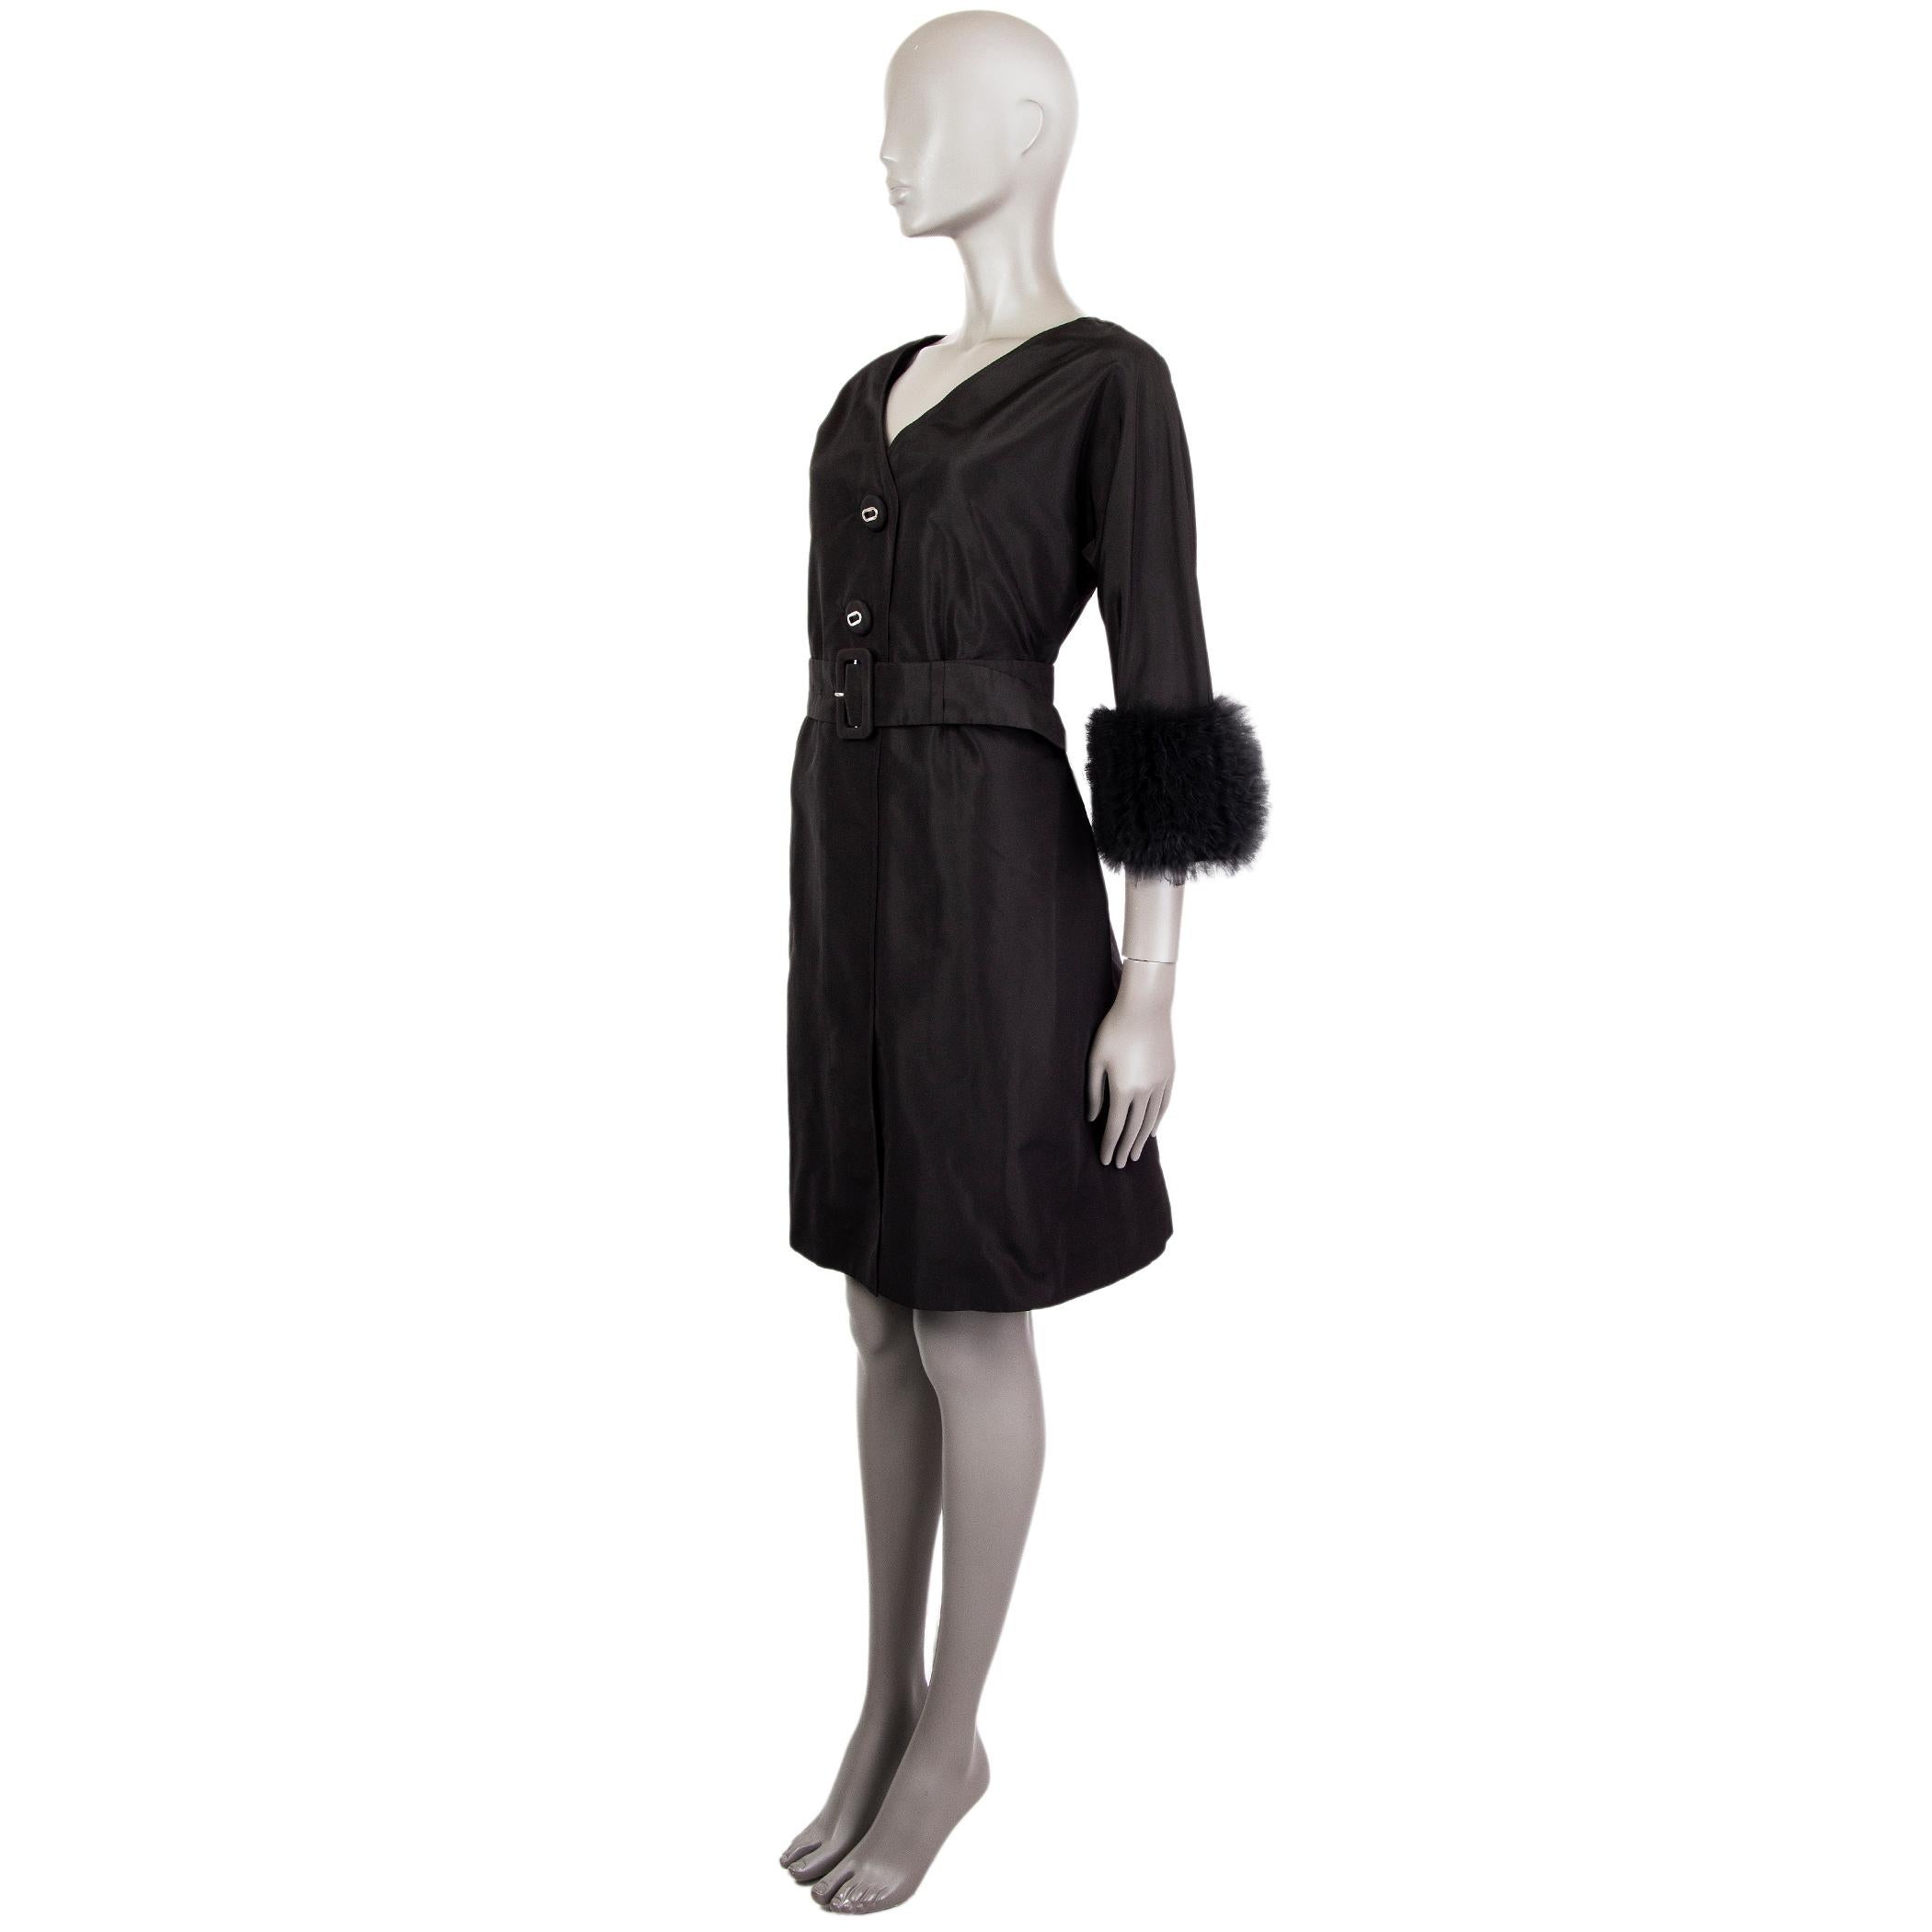 Prada shift dress in black silk (100%). With v back, ruffled tulle cuffs in black nylon (100%), and two slit pockets on the sides. Closes with two large black fabric-lined buttons on the back. Lined in black viscose (67%) and silk (33%).  Comes with